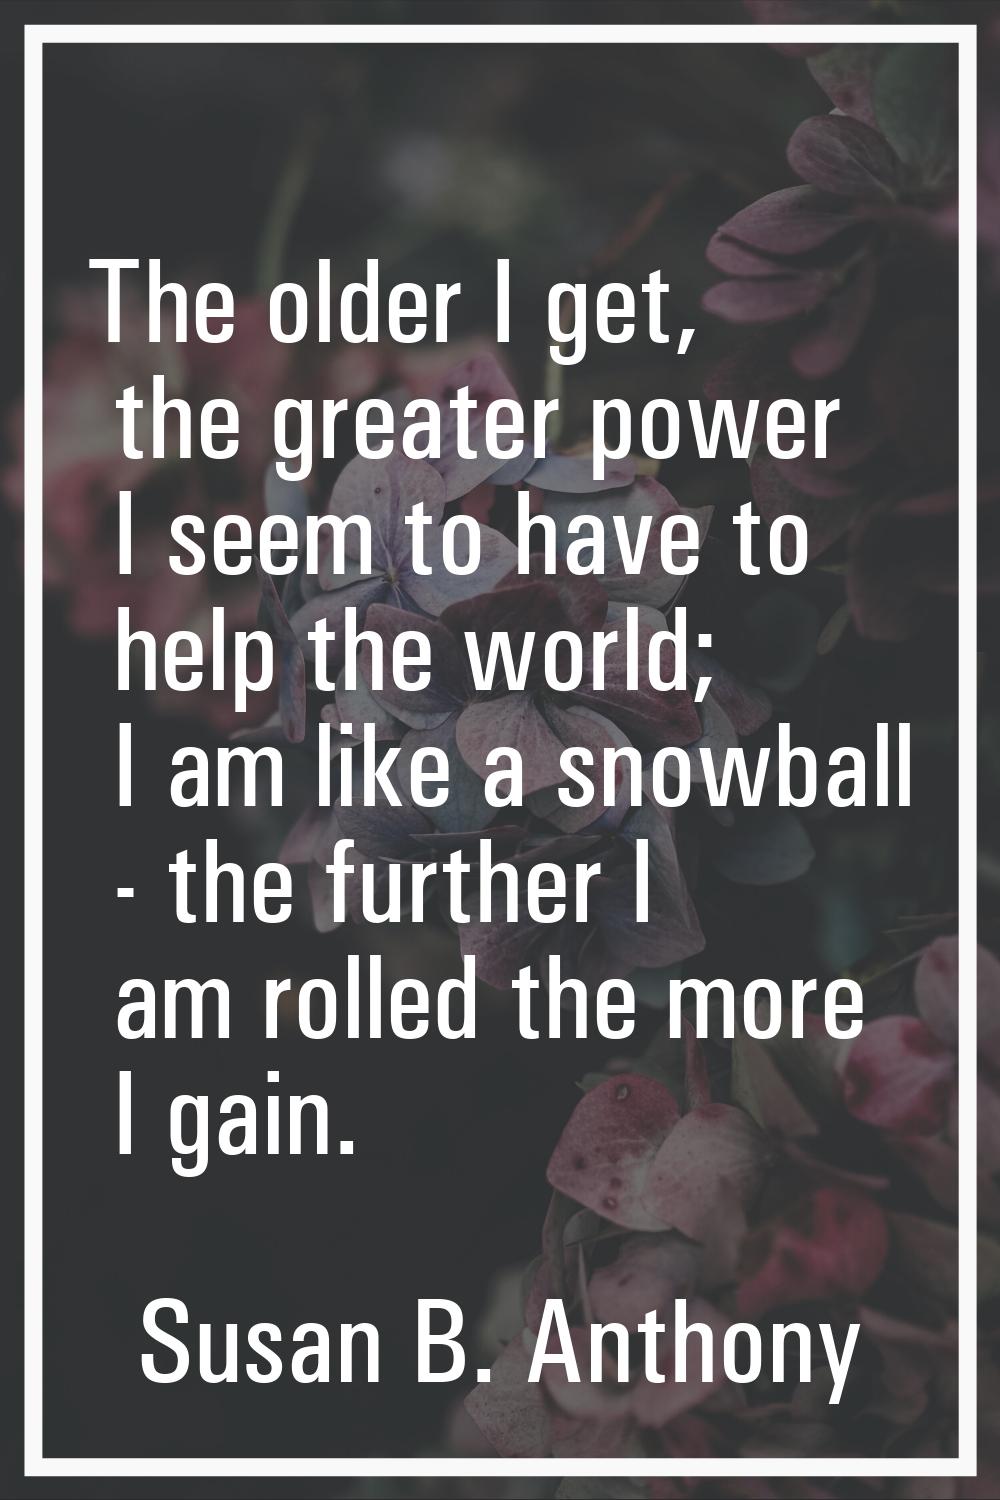 The older I get, the greater power I seem to have to help the world; I am like a snowball - the fur